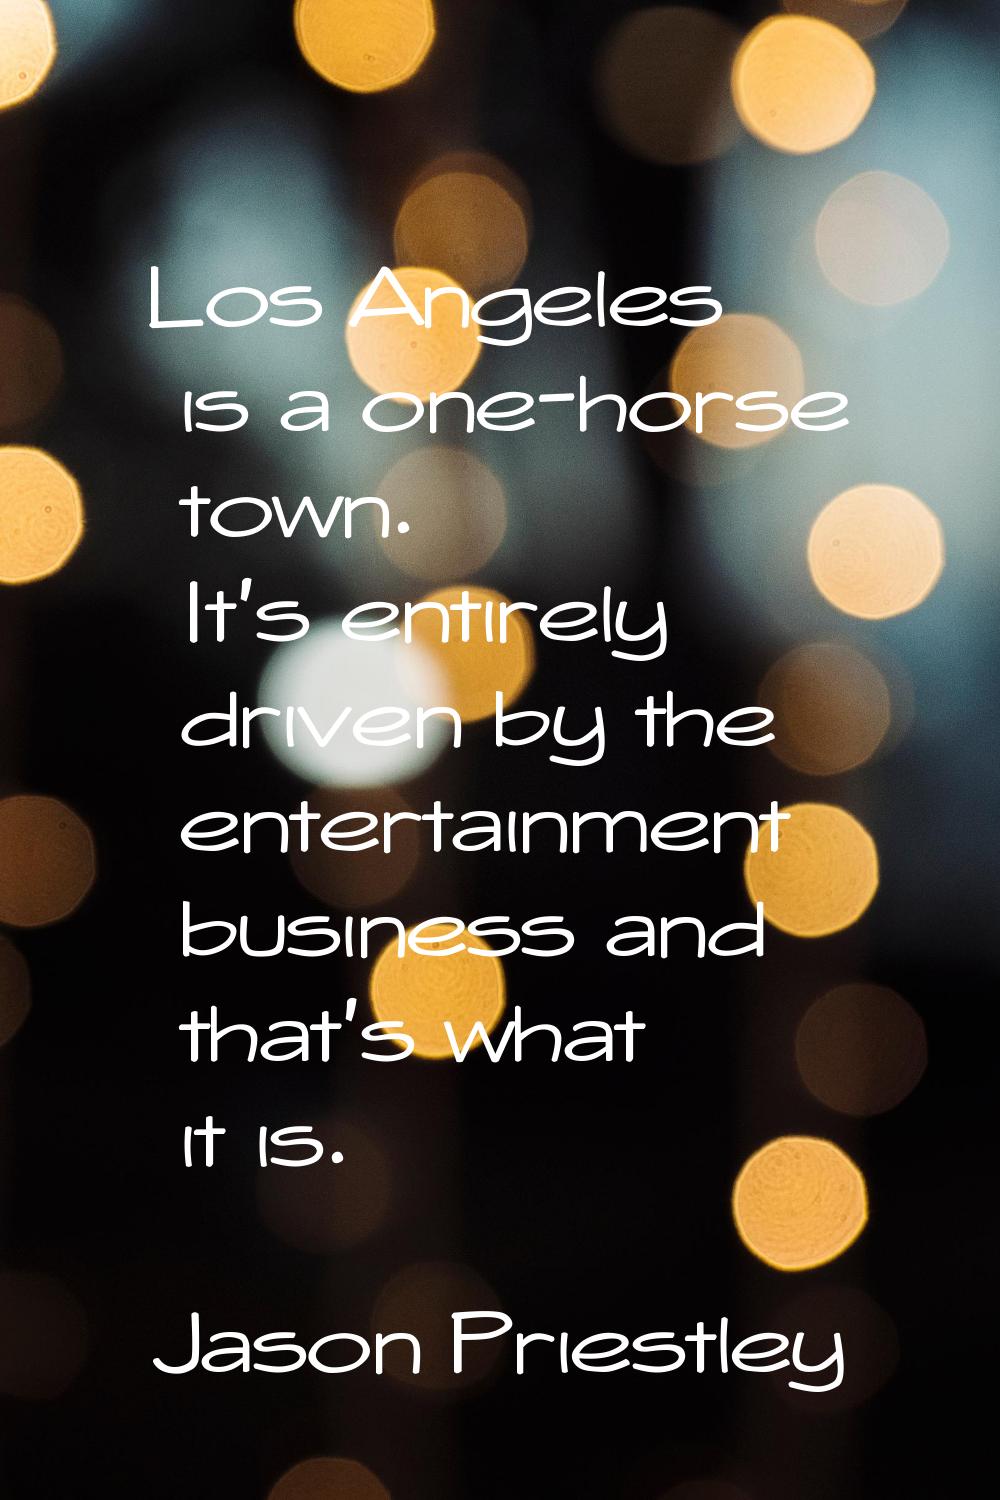 Los Angeles is a one-horse town. It's entirely driven by the entertainment business and that's what